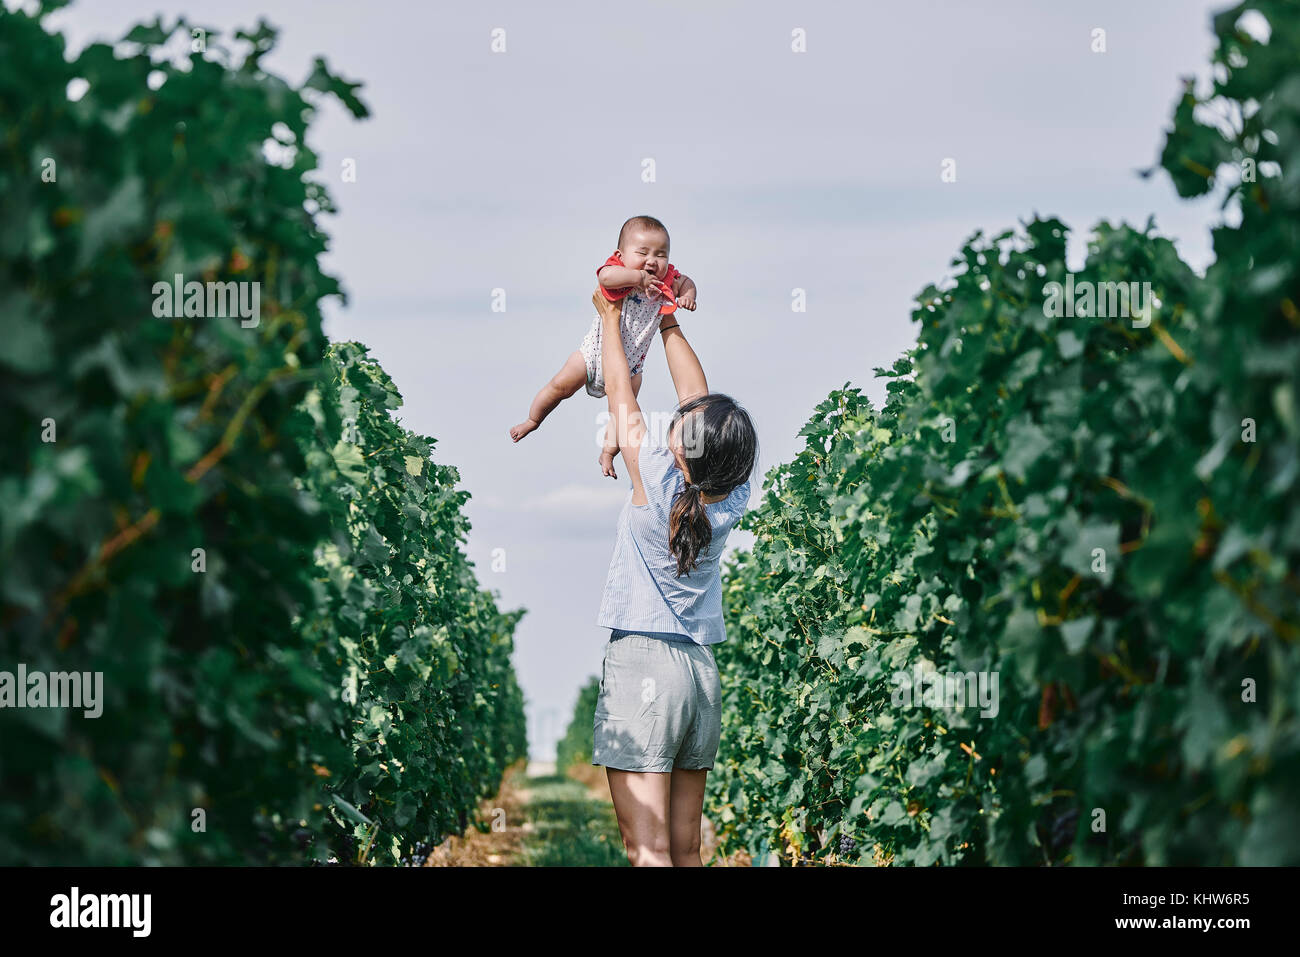 Woman holding up baby daughter in vineyard, Bergerac, aquitaine, france Banque D'Images